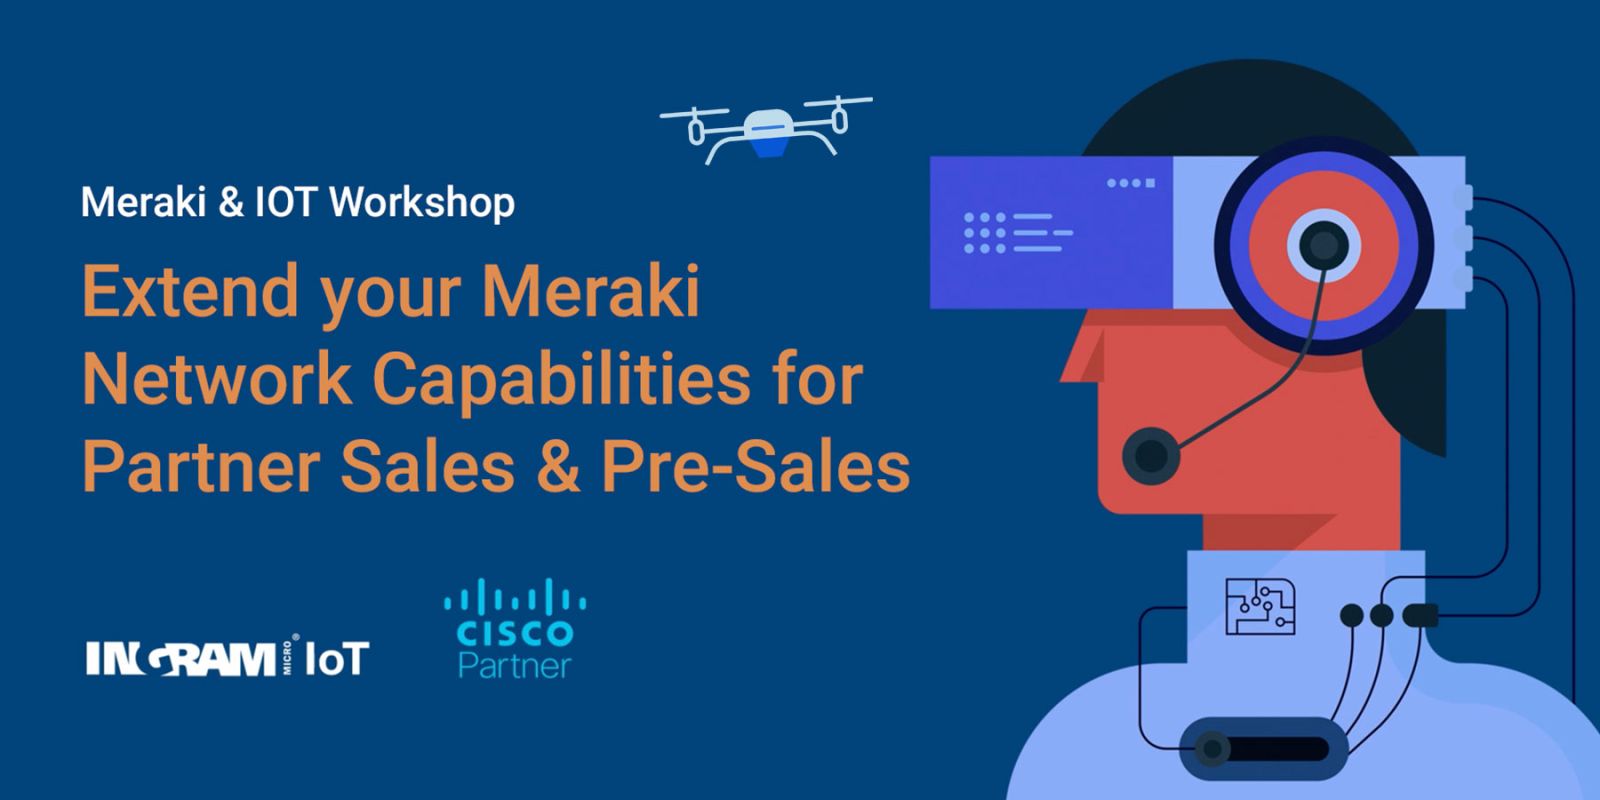 Extend your Meraki Network Capabilities for Partner Sales and Pre-Sales Featured Image